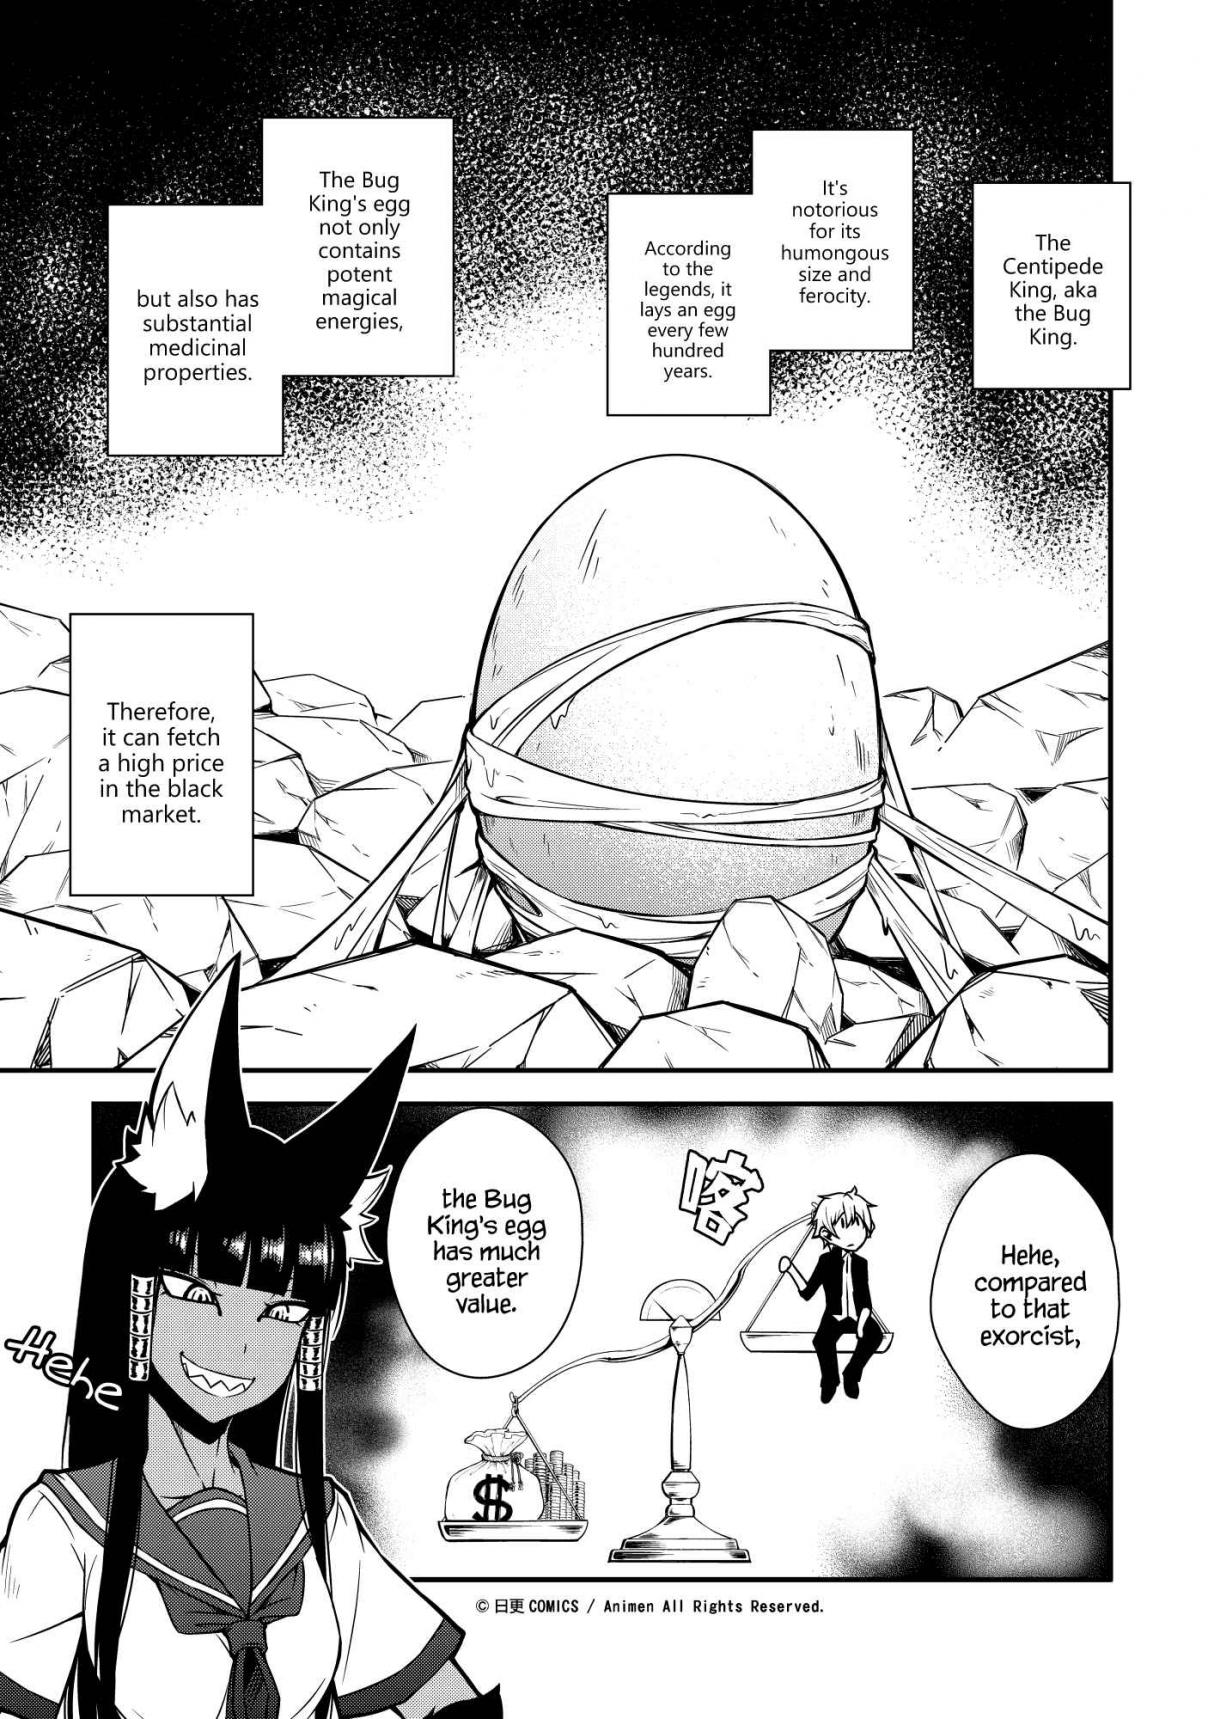 The Girl With Horns Vol. 1 Ch. 5 The Egg of Calamity